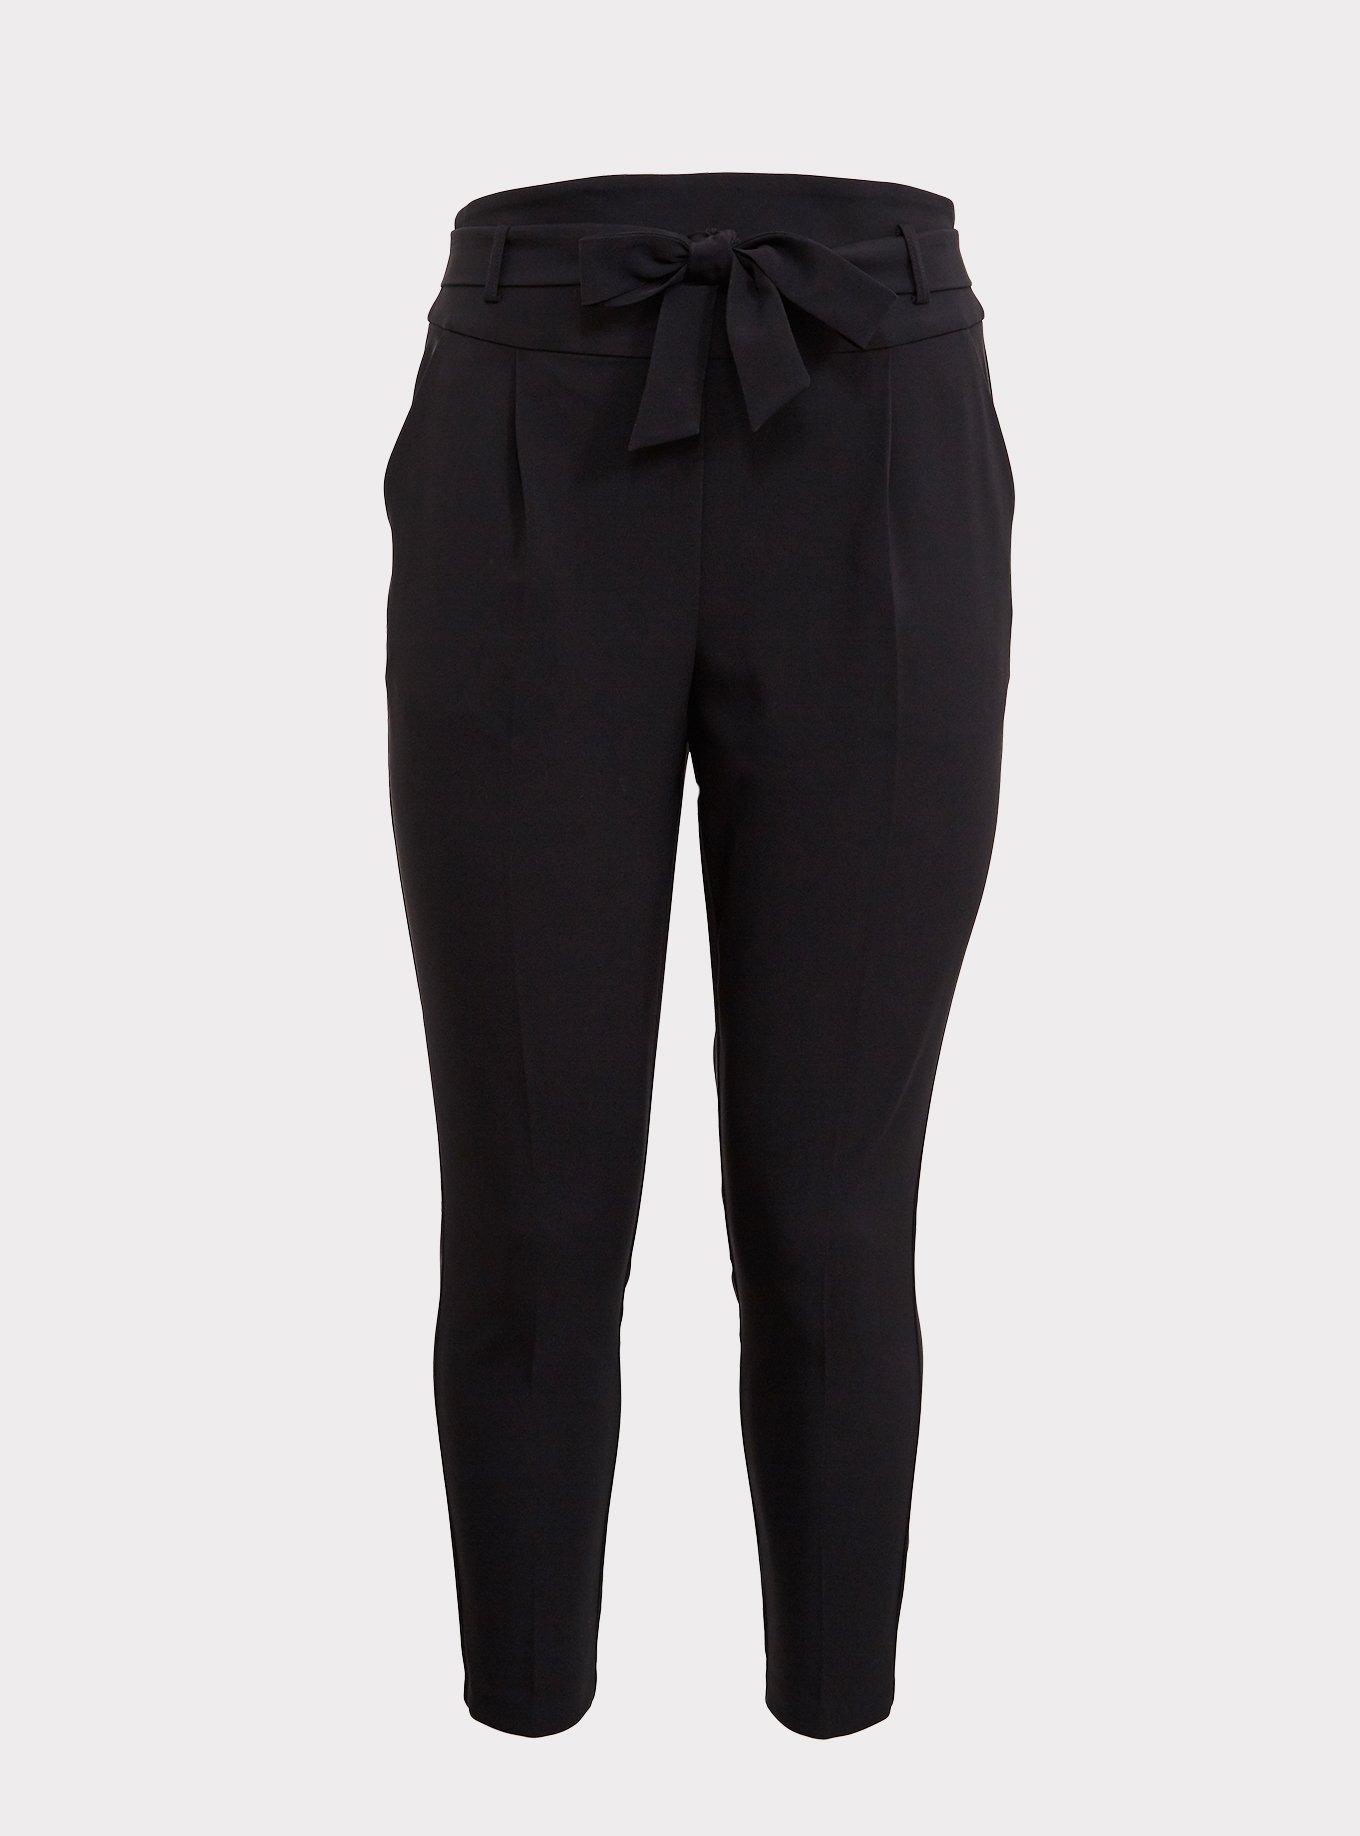 Black High Rise Tapered Pants